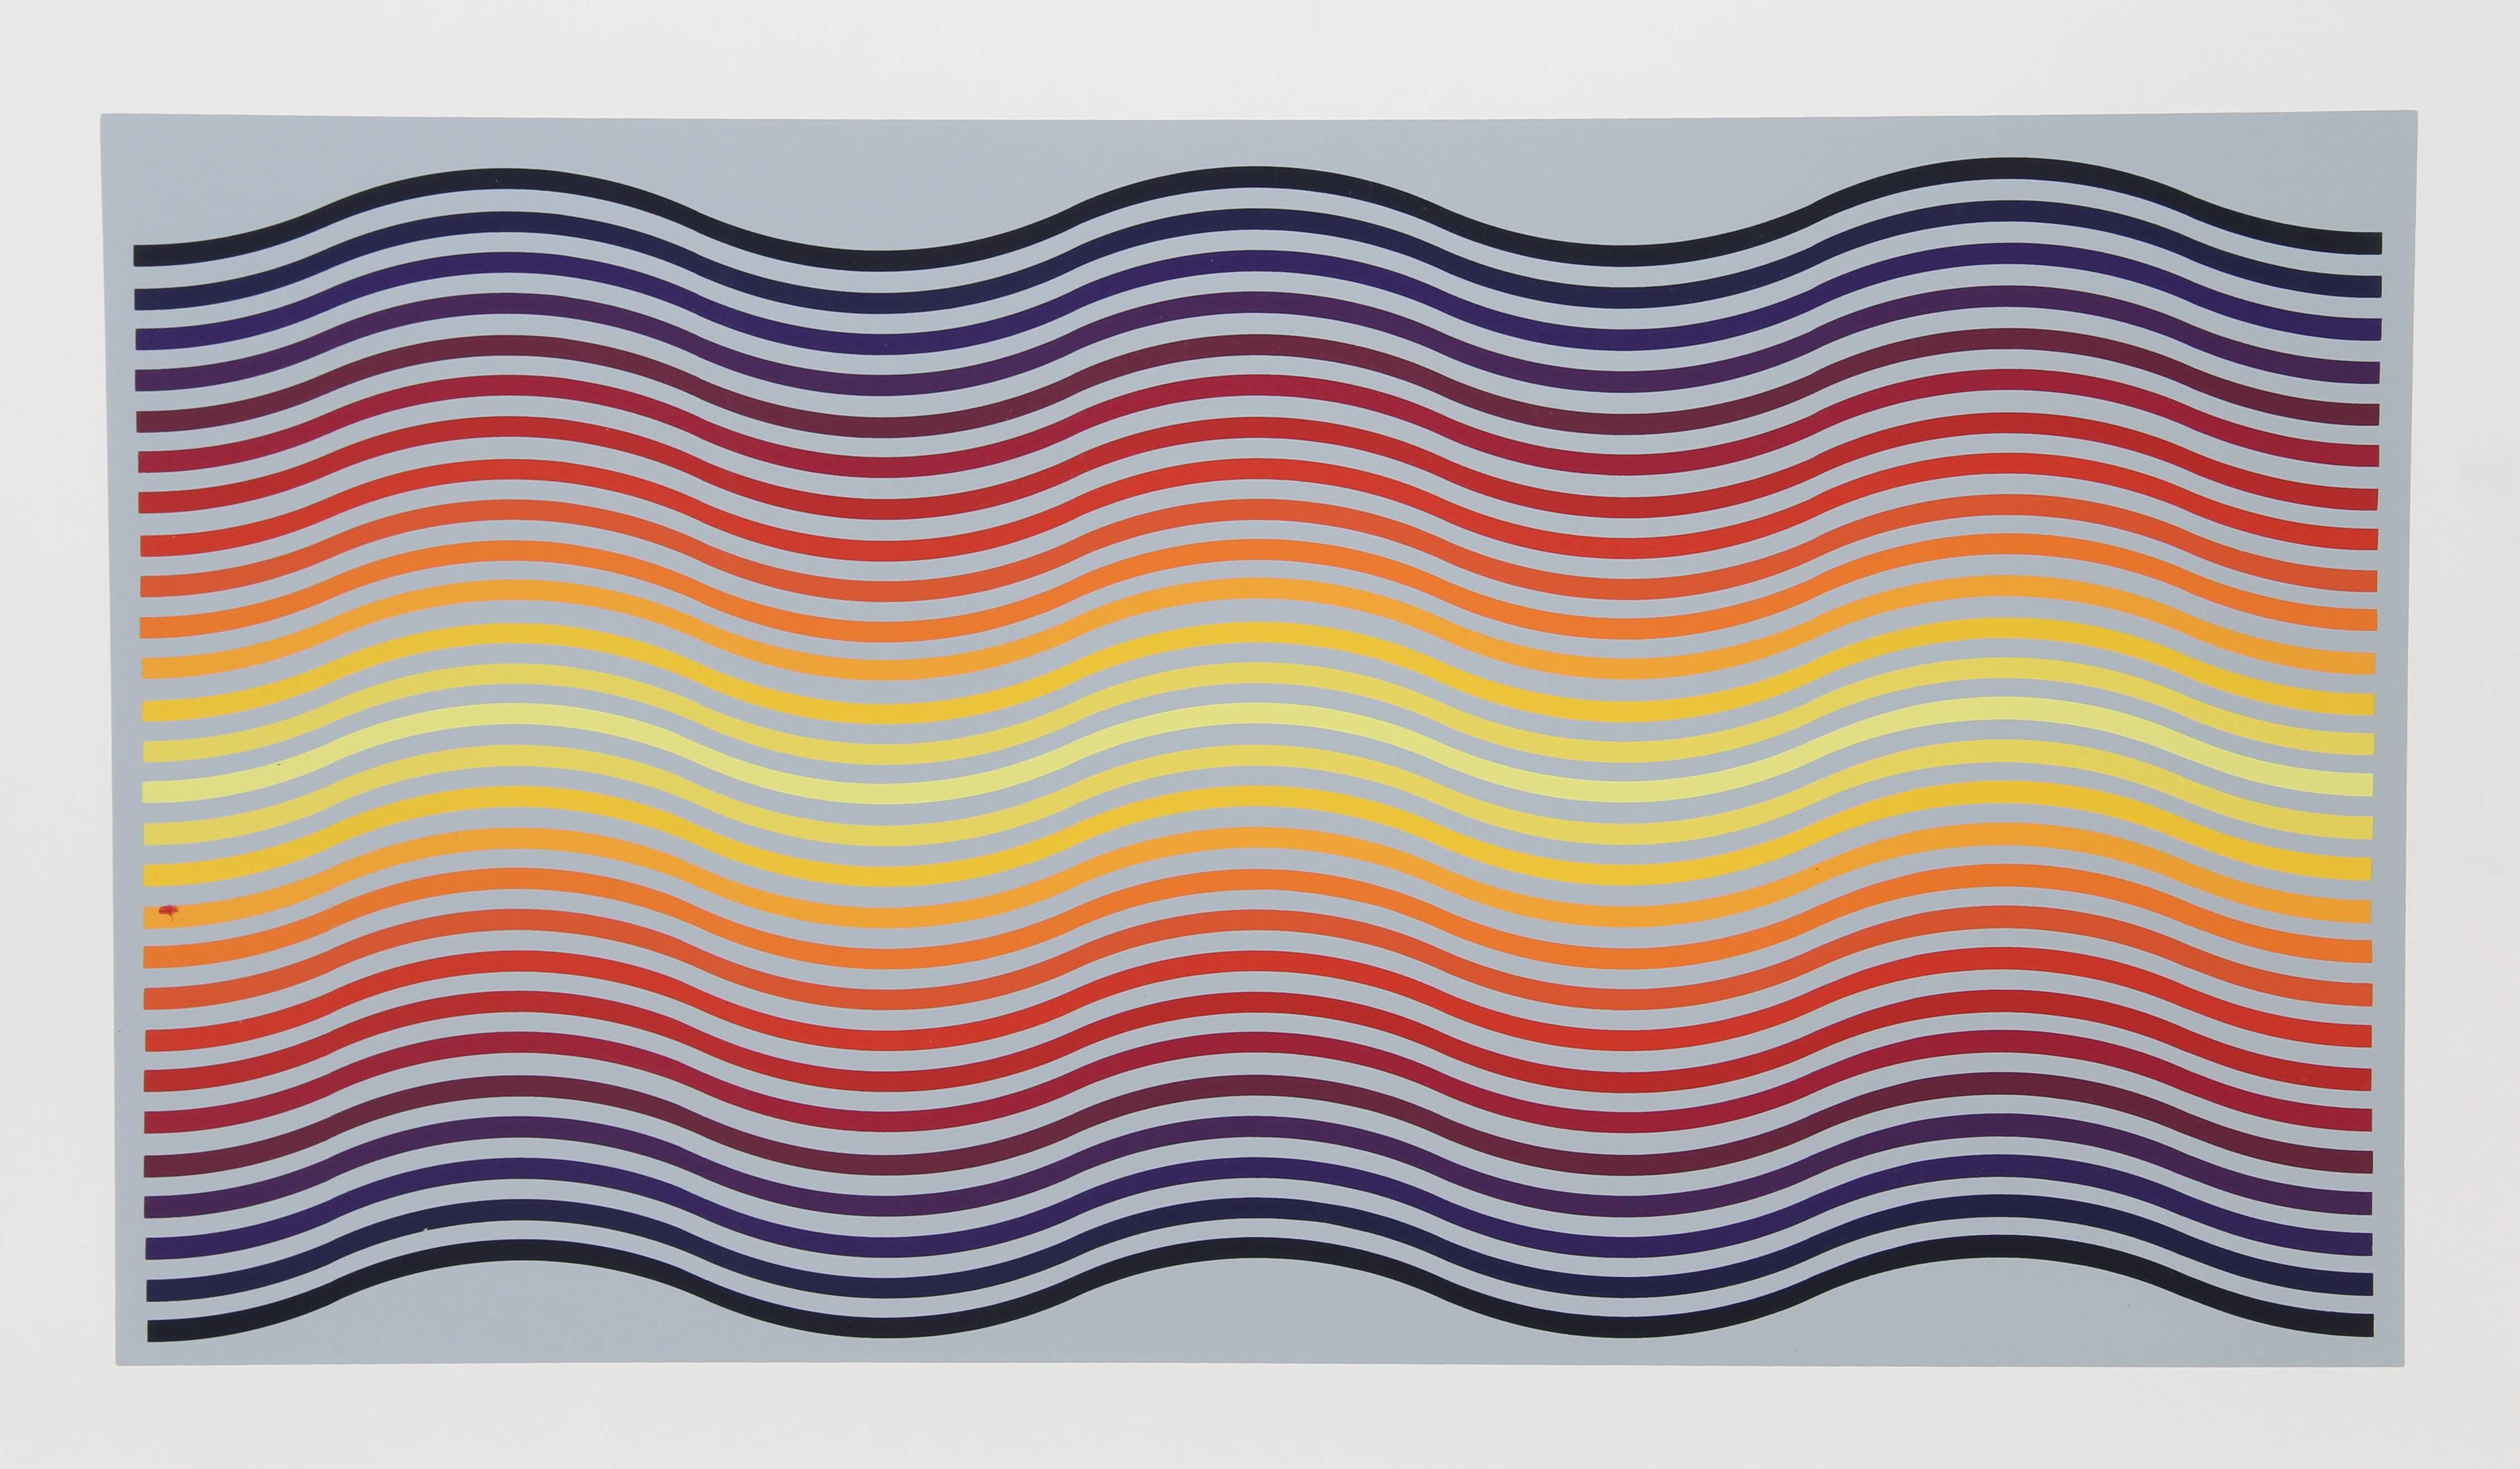 Artist:  Jurgen Peters, German (1936 - )
Title:  Rainbow Waves
Year:  1981
Medium:  Screenprint, signed and numbered in pencil
Edition:  250, AP 30
Image Size:  18.5 x 34 inches
Size:  22.5 in. x 38 in. (57.15 cm x 96.52 cm)